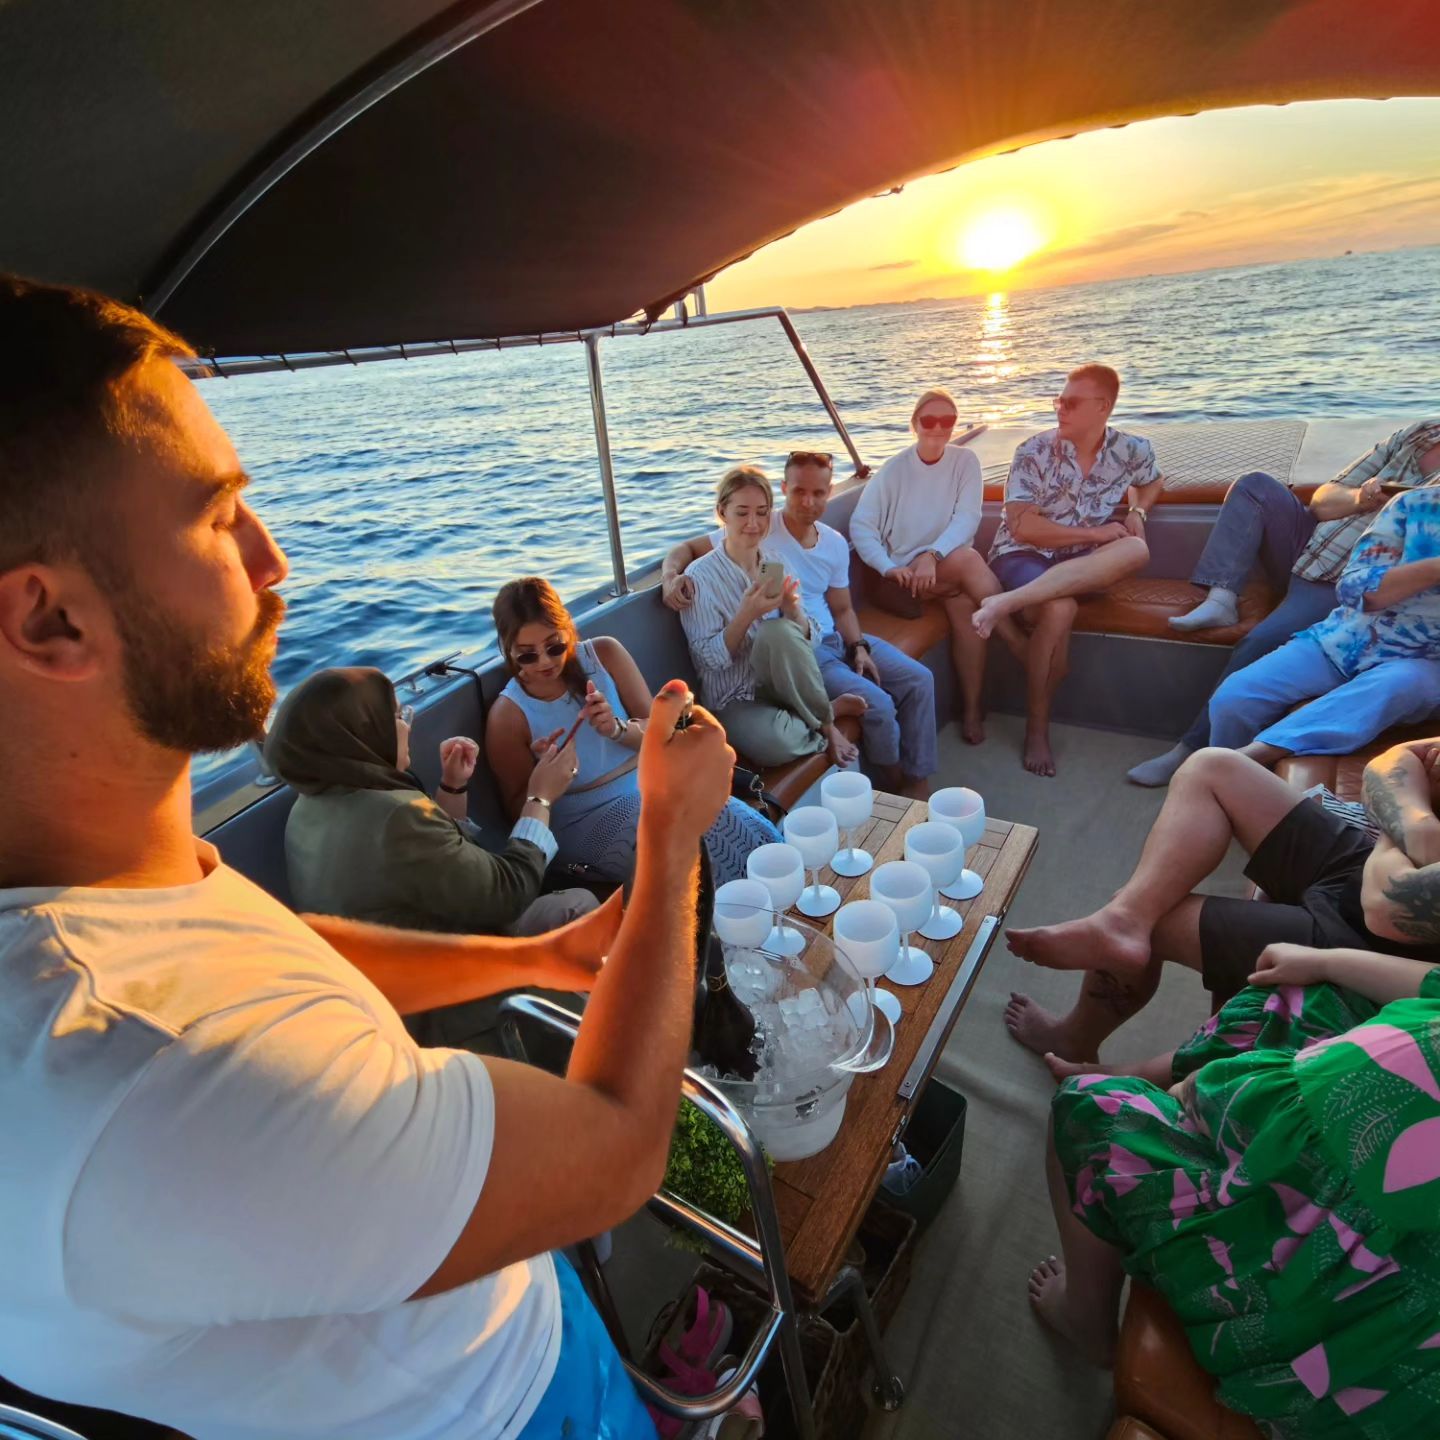 SUNSET BOAT TOUR with glass of Prosecco